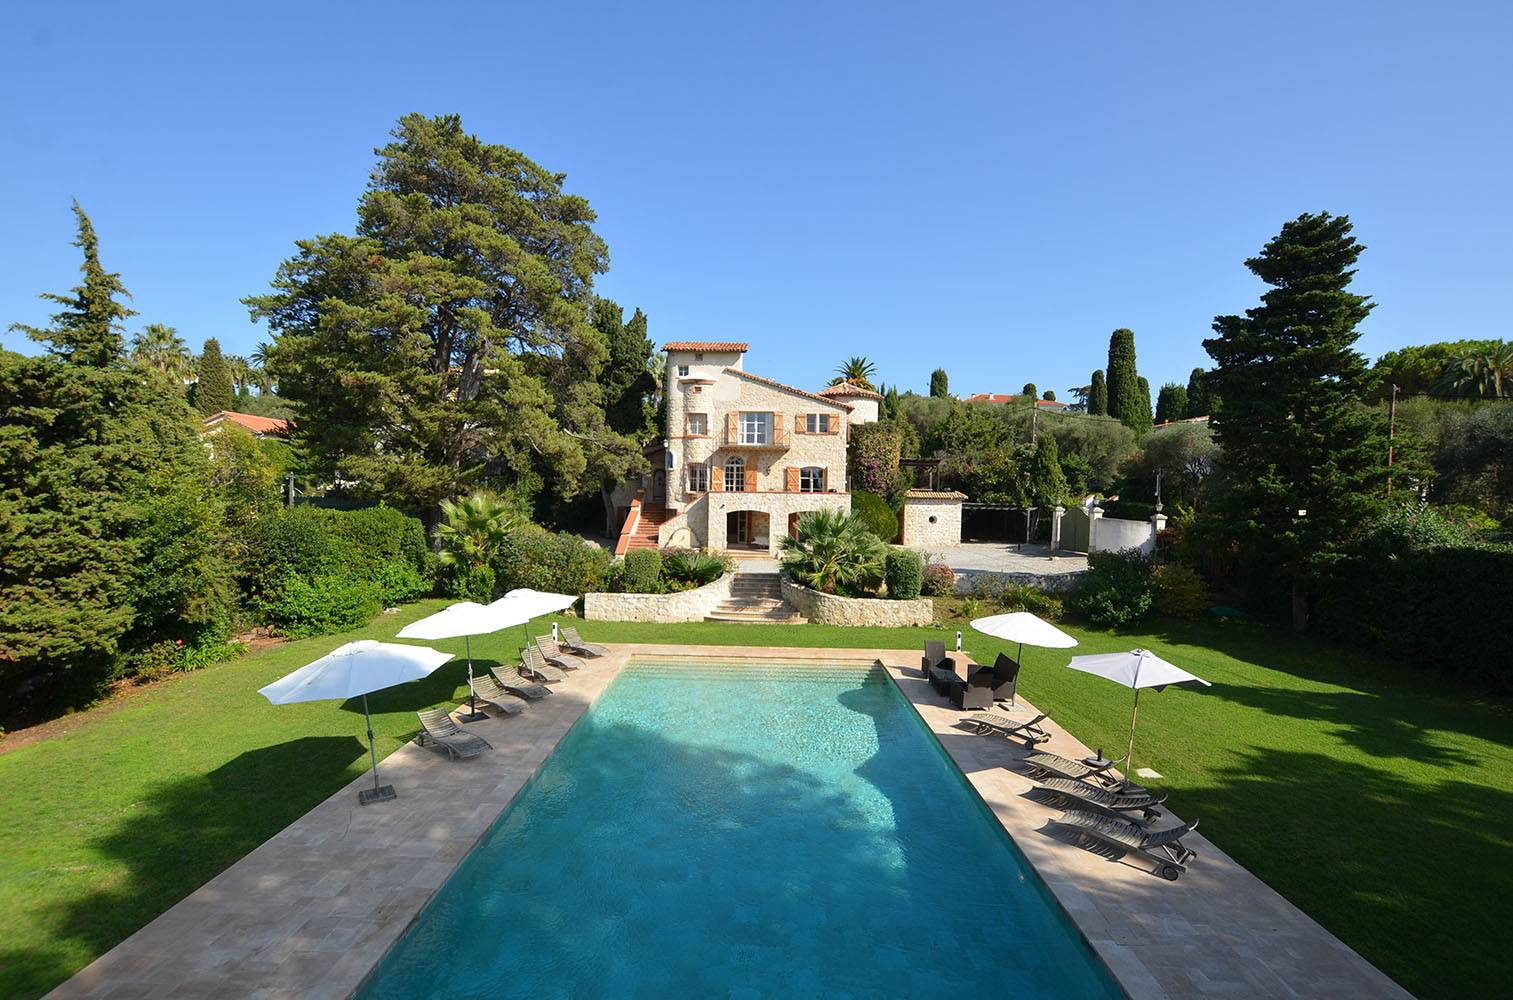 Charming stone property in Cap d’Antibes 200 meters from the beach